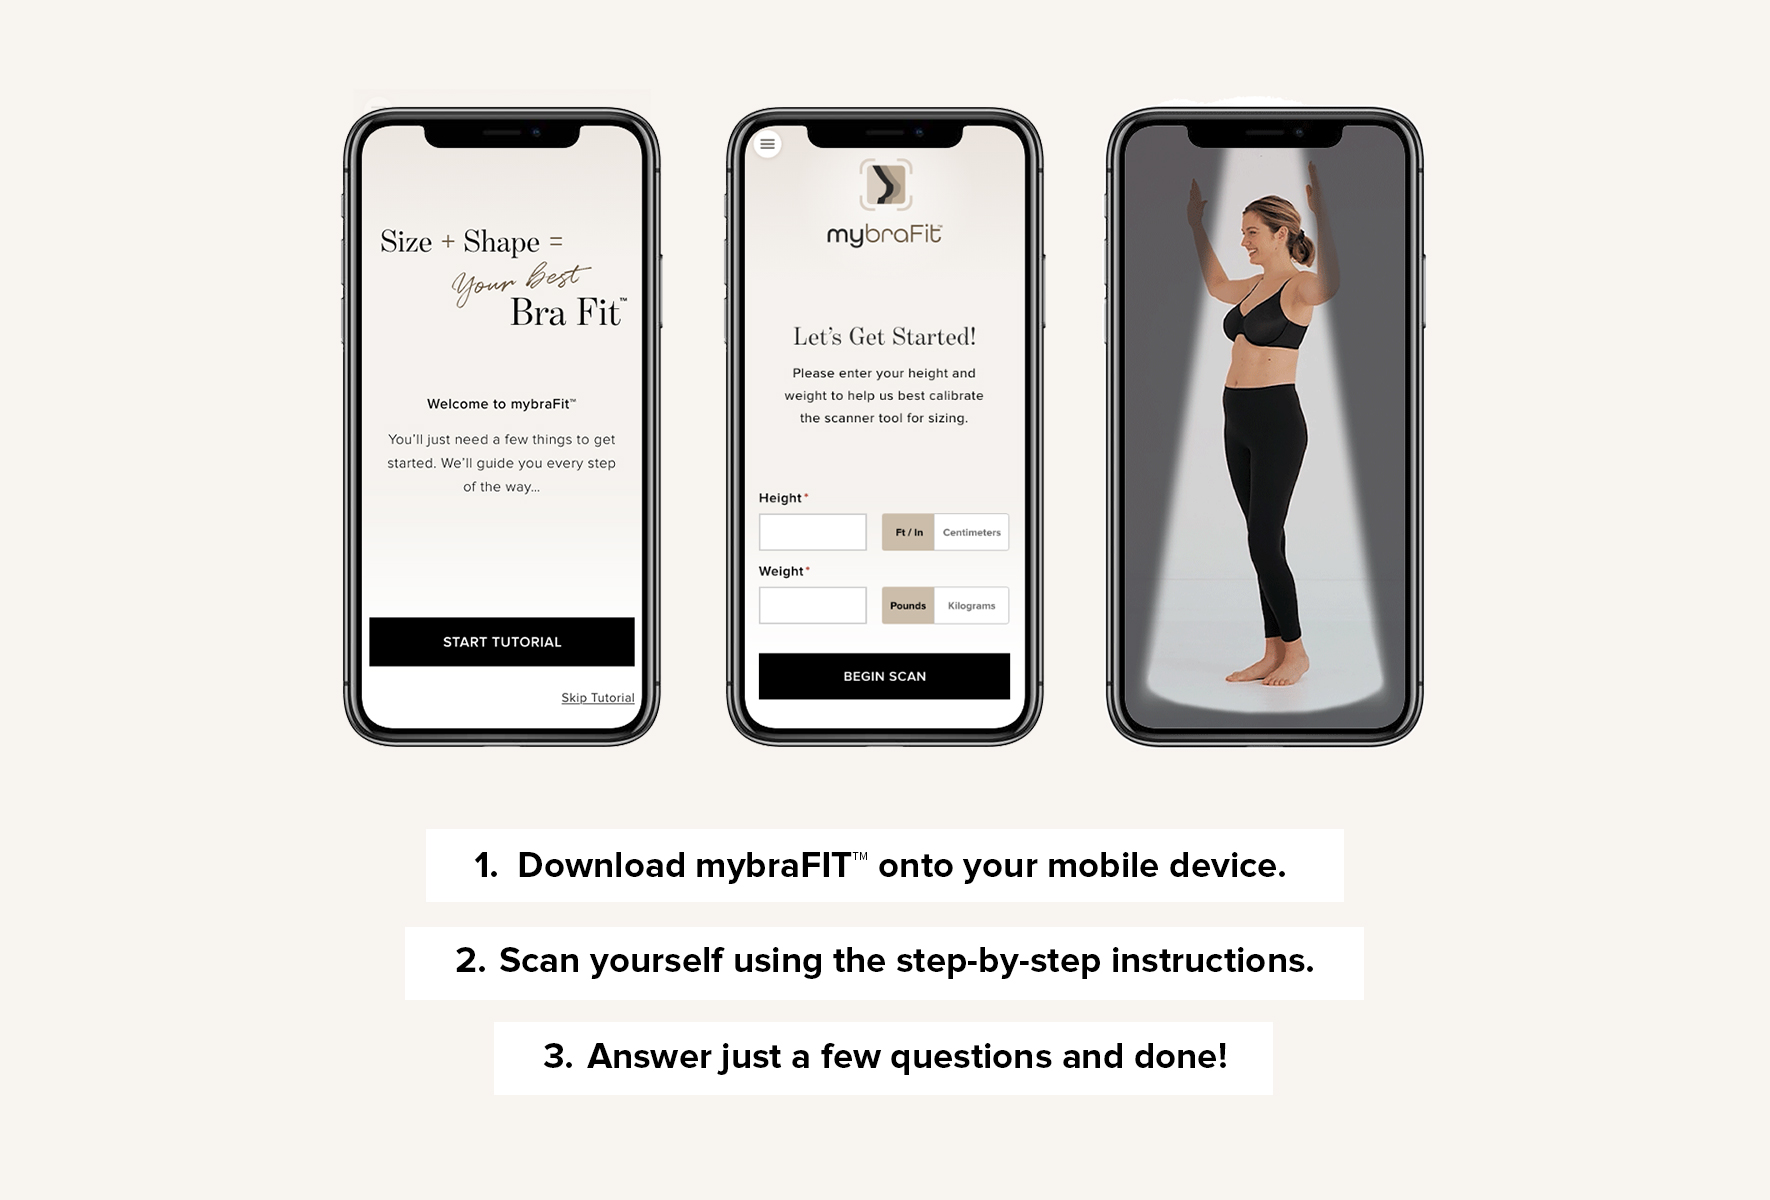 Wacoal Launches AI-Powered App to Help Bra Shoppers Find Their Fit